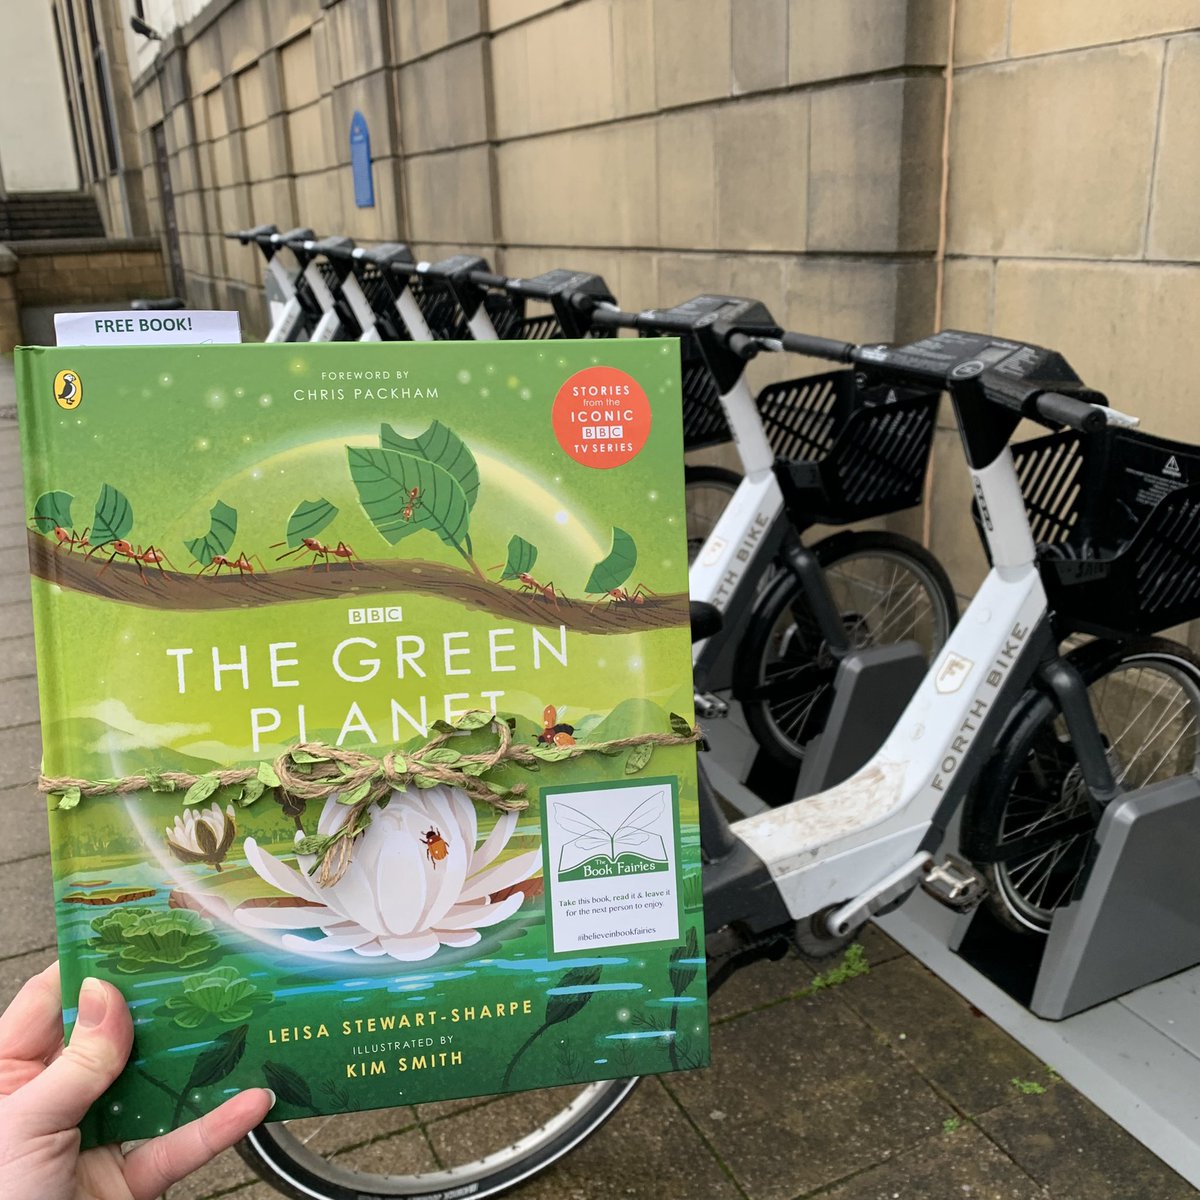 The Book Fairies are excited to start 2022 with a brand new David Attenborough series - #TheGreenPlanet! We are celebrating the BBC series by sharing copies of the book! #IBelieveInBookFairies #GreenBookFairies #TBFGreenPlanet #DavidAttenborough #BBC #BookFairiesFalkirk #Falkirk